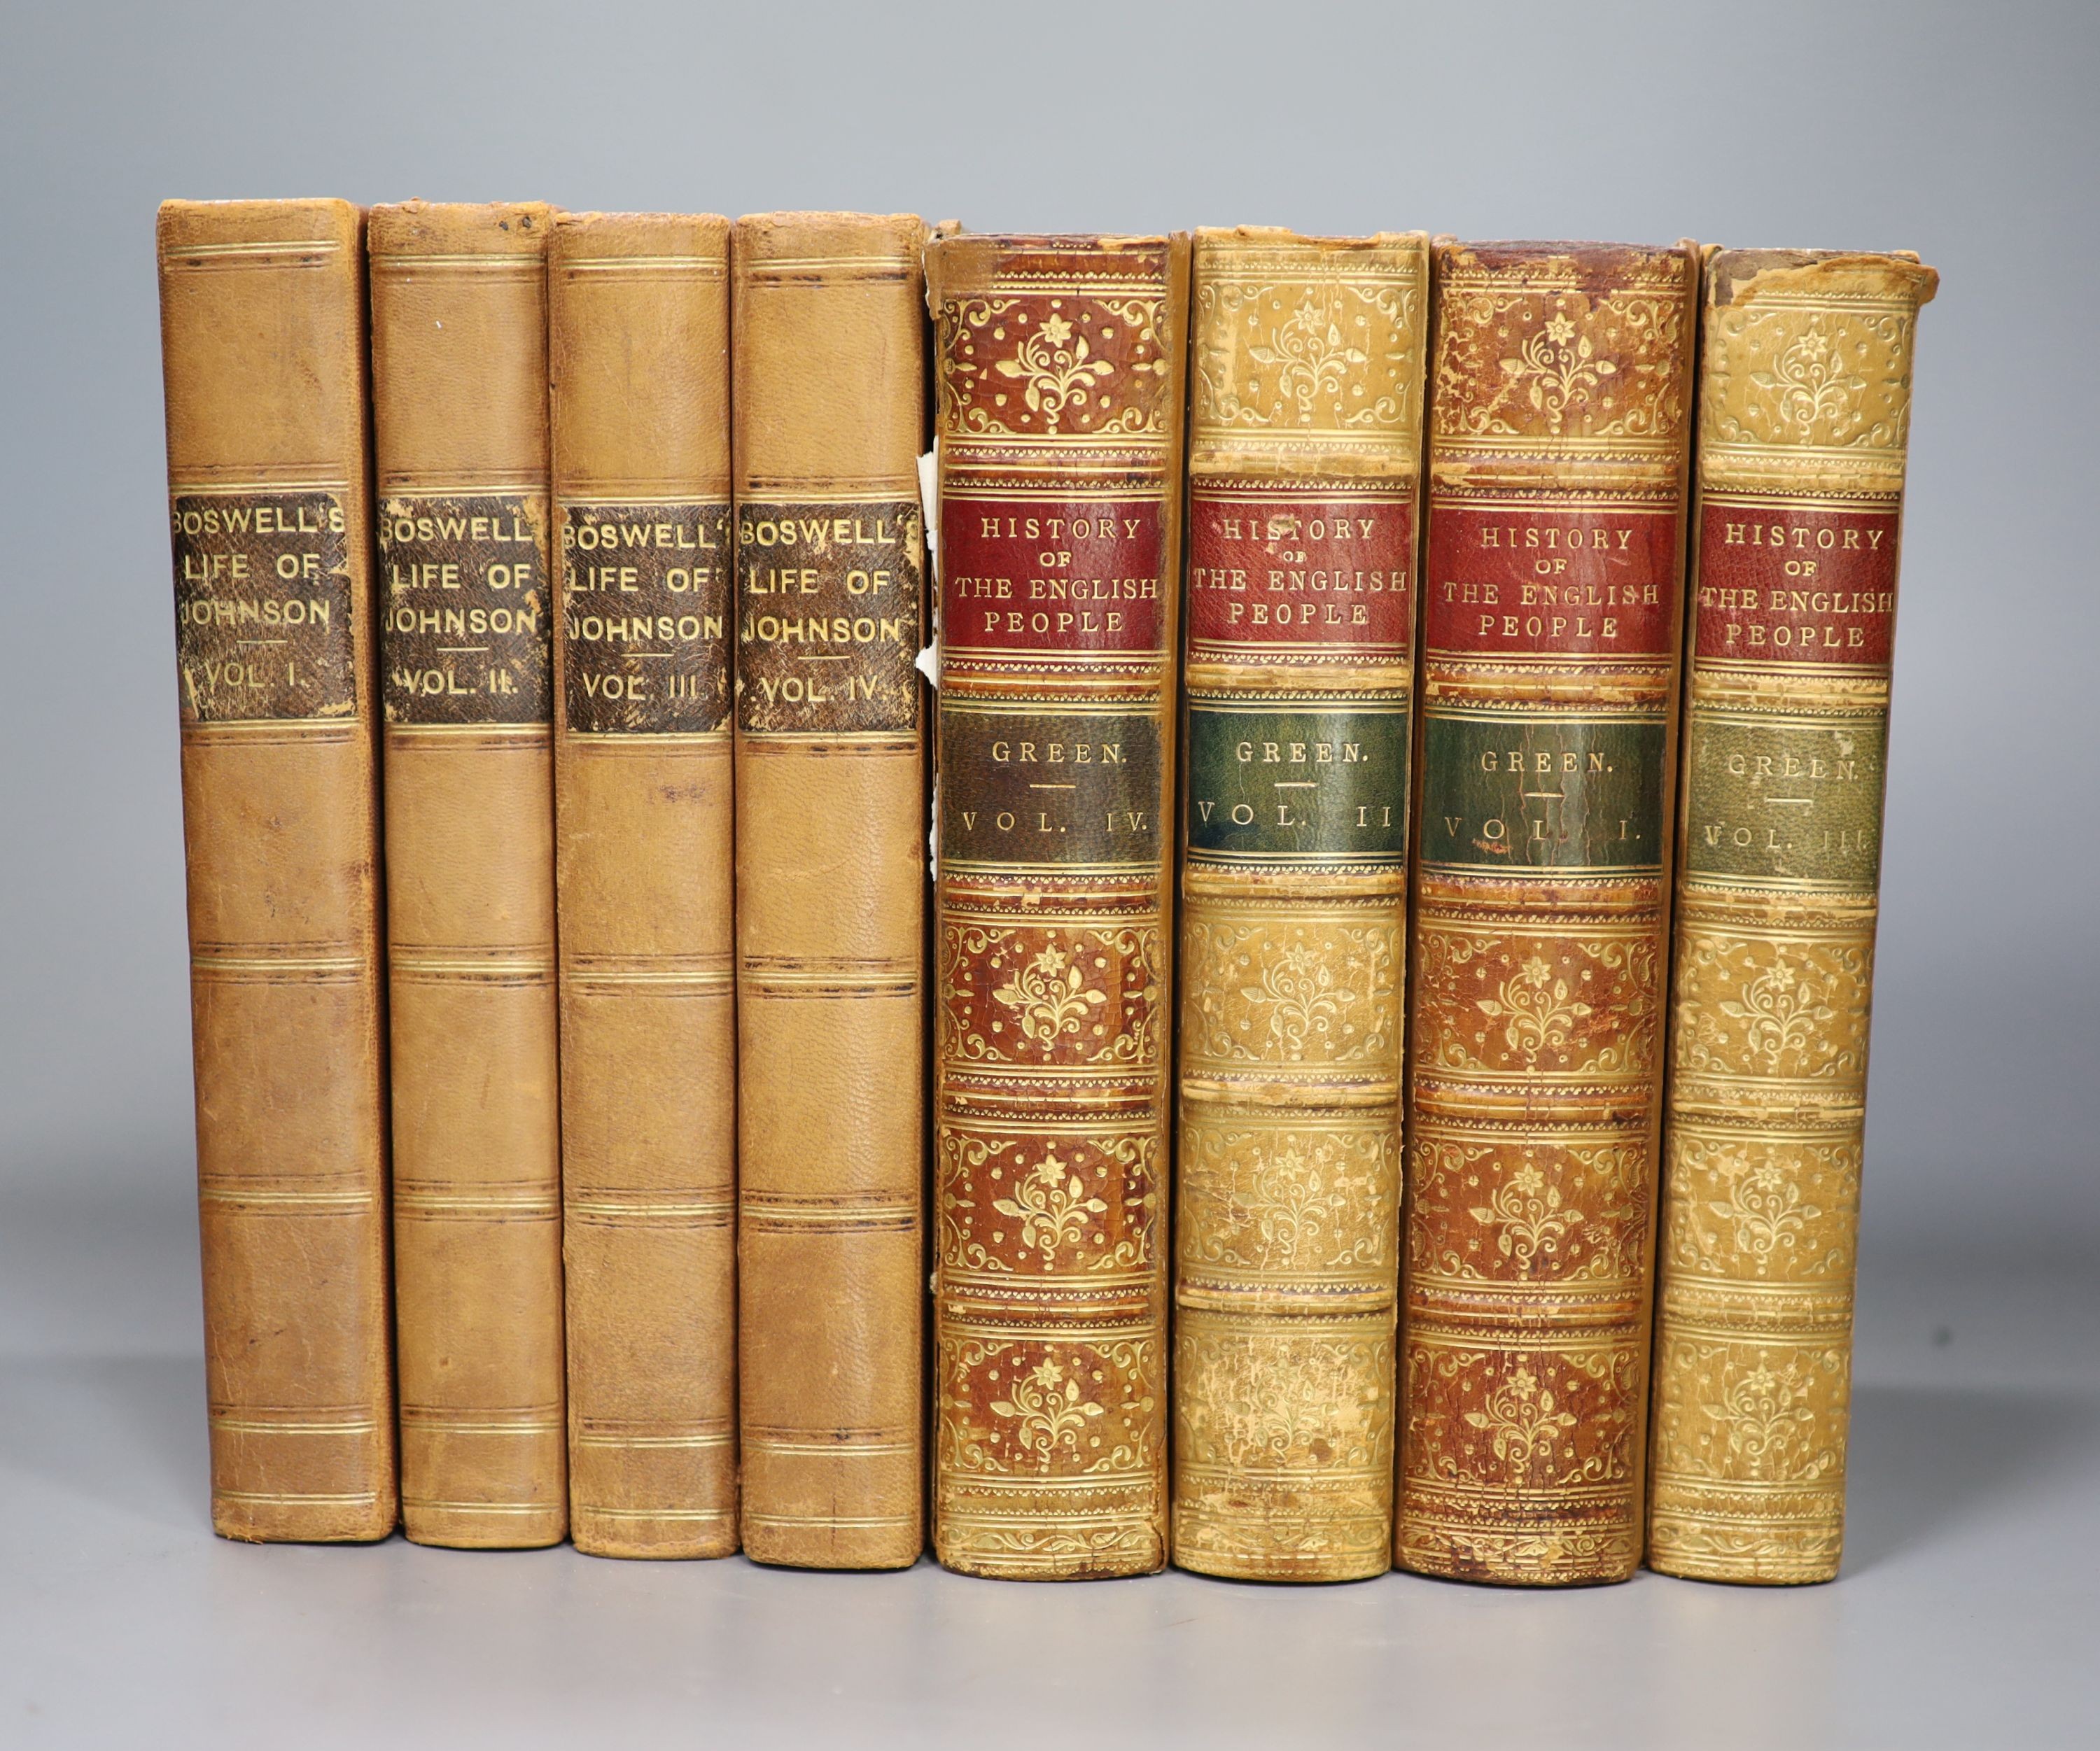 Boswell, James - The Life of Samuel Johnson, 9th edition, 4 vols, 8vo, later half calf, with portrait, front inner joint to vol 1 poorly repaired with sellotape, London, 1822 and Green, John Richard - History of the Engl